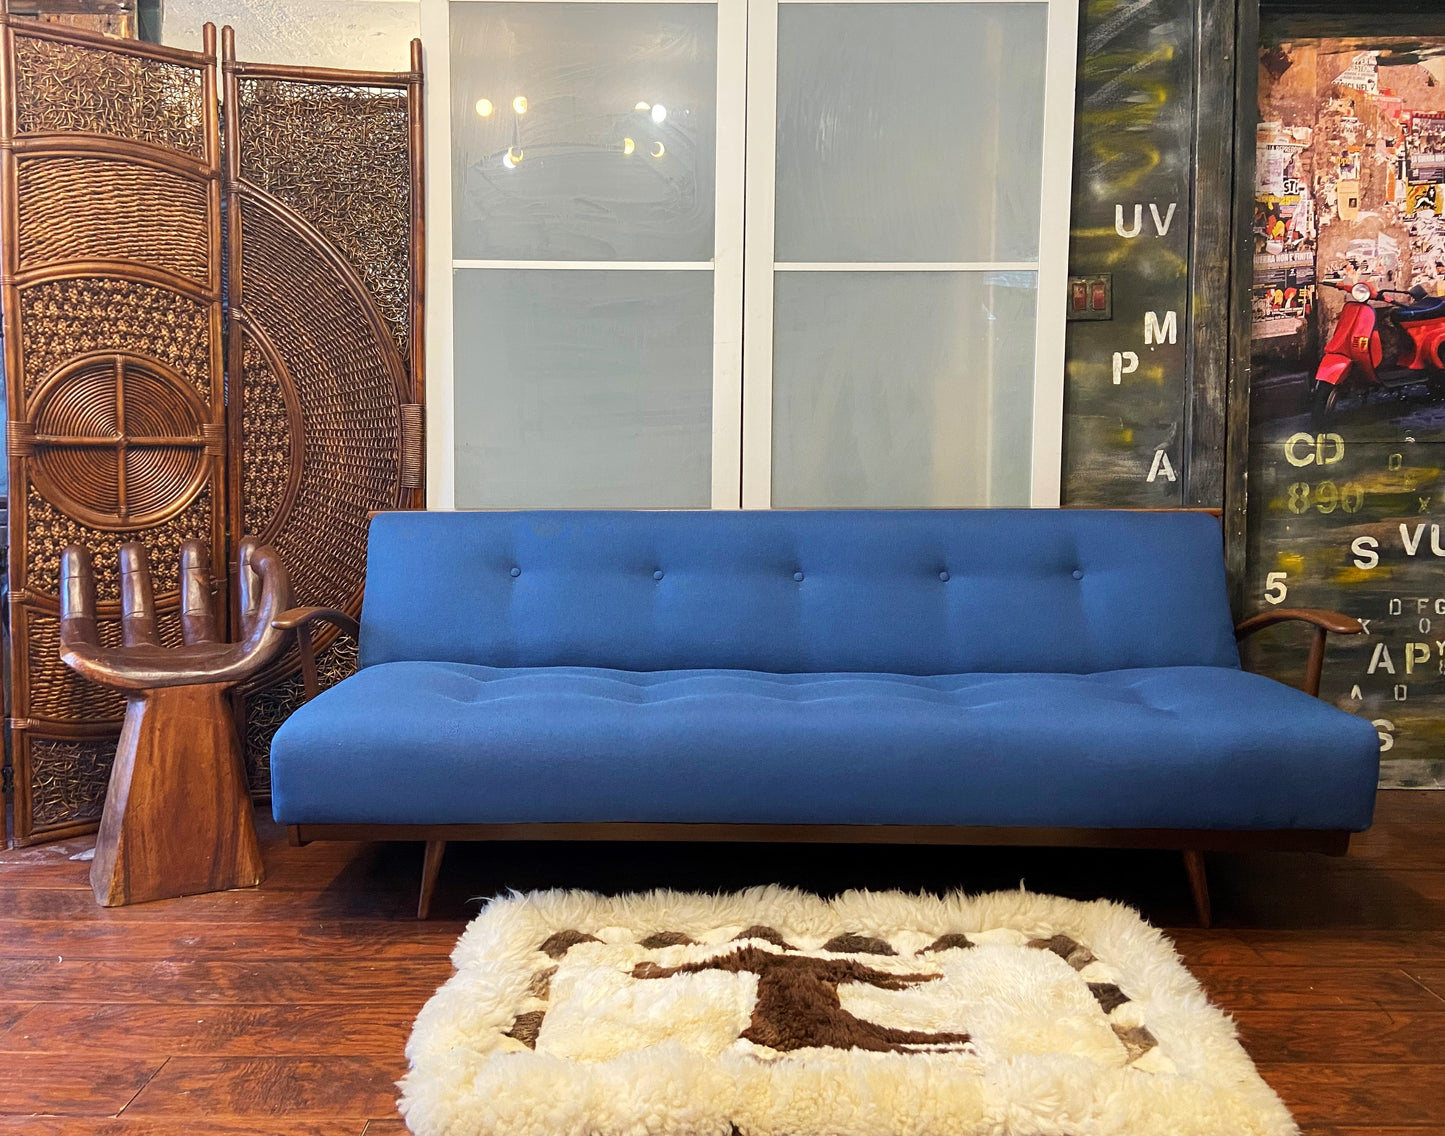 REFINISHED REUPHOLSTERED Mid Century Modern Folding Sofa - Bed